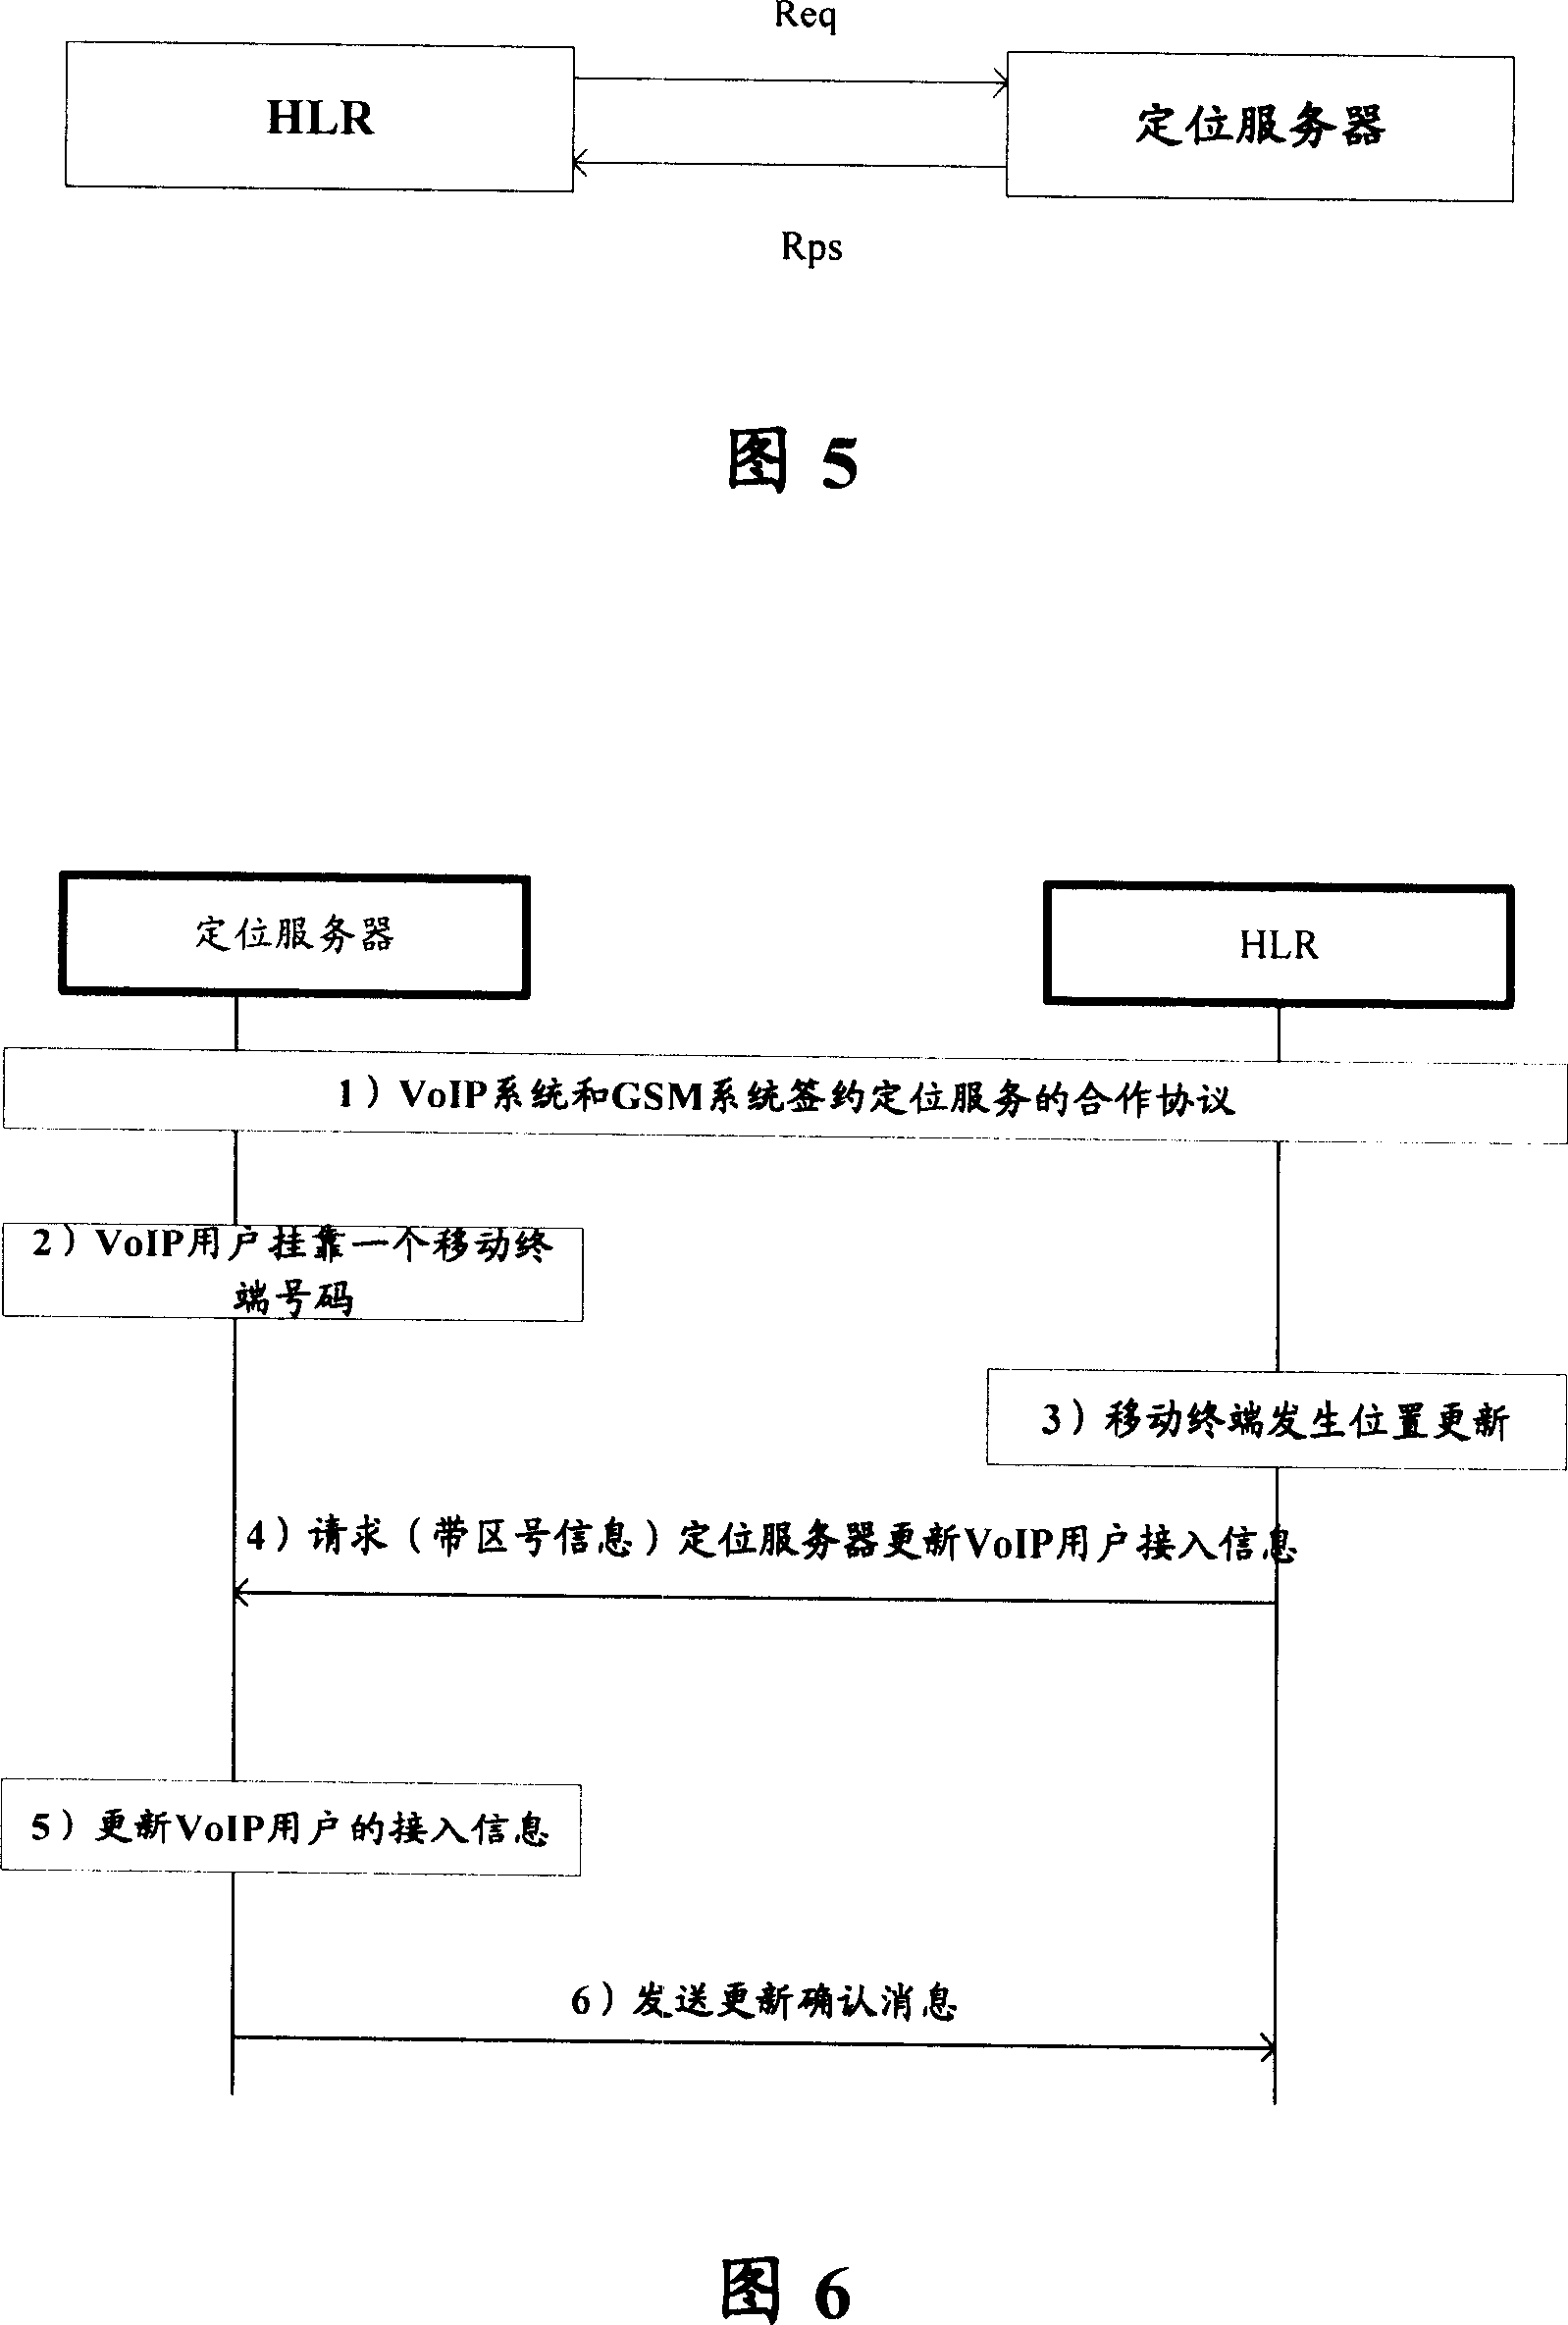 Internet protocal carried voice user accessing method, positioning device and network equipment